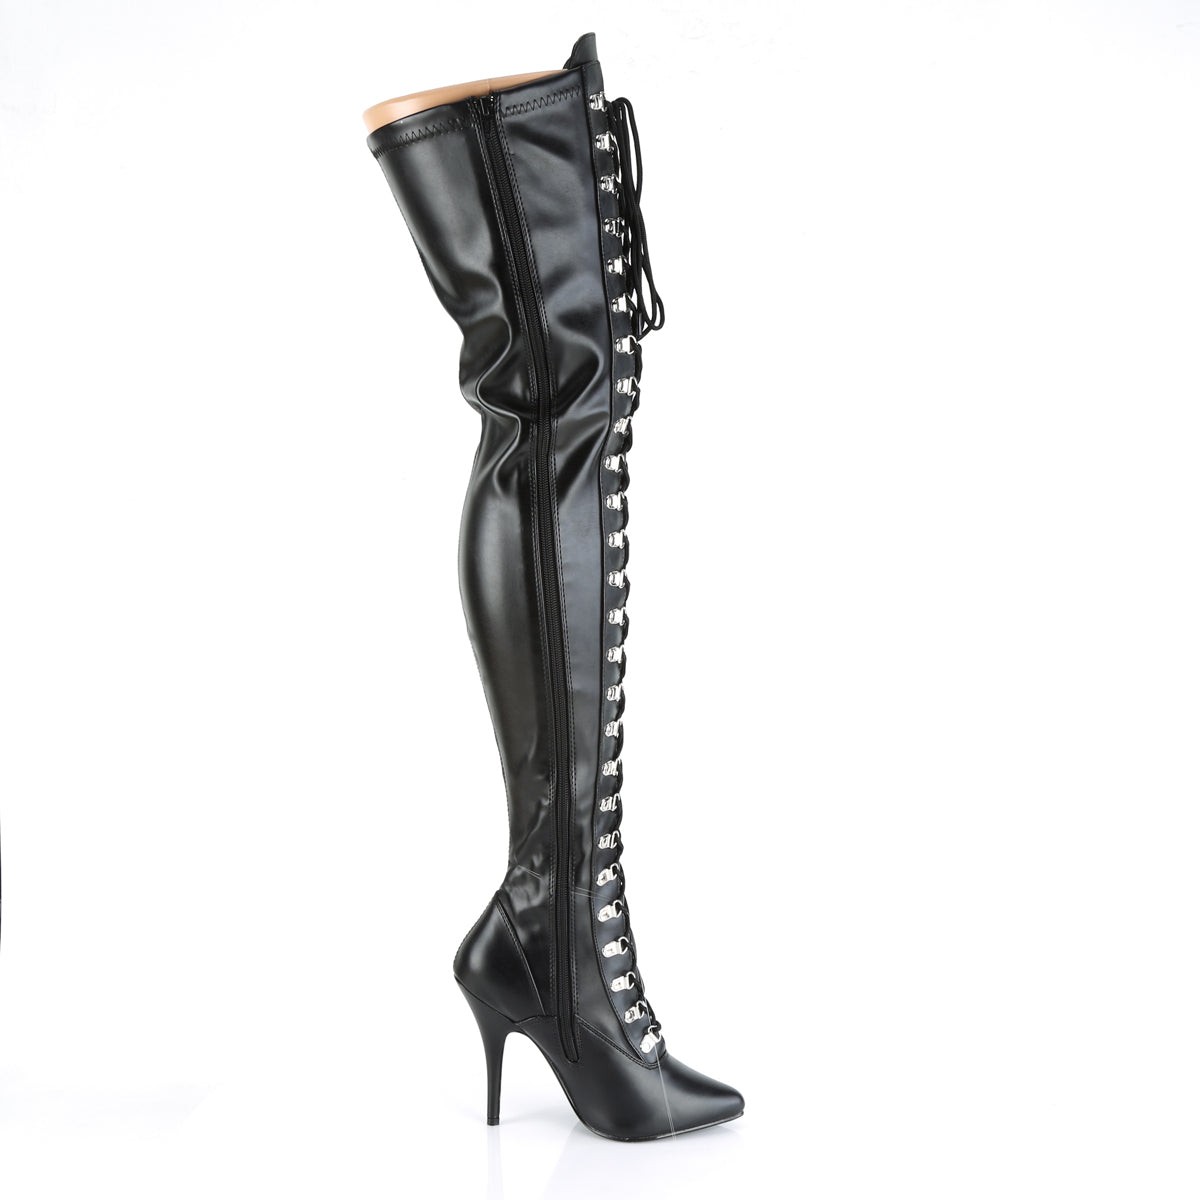 SEDUCE-3024 Pleaser Thigh Boots 5" Heel Black Fetish Shoes-Pleaser- Sexy Shoes Fetish Heels